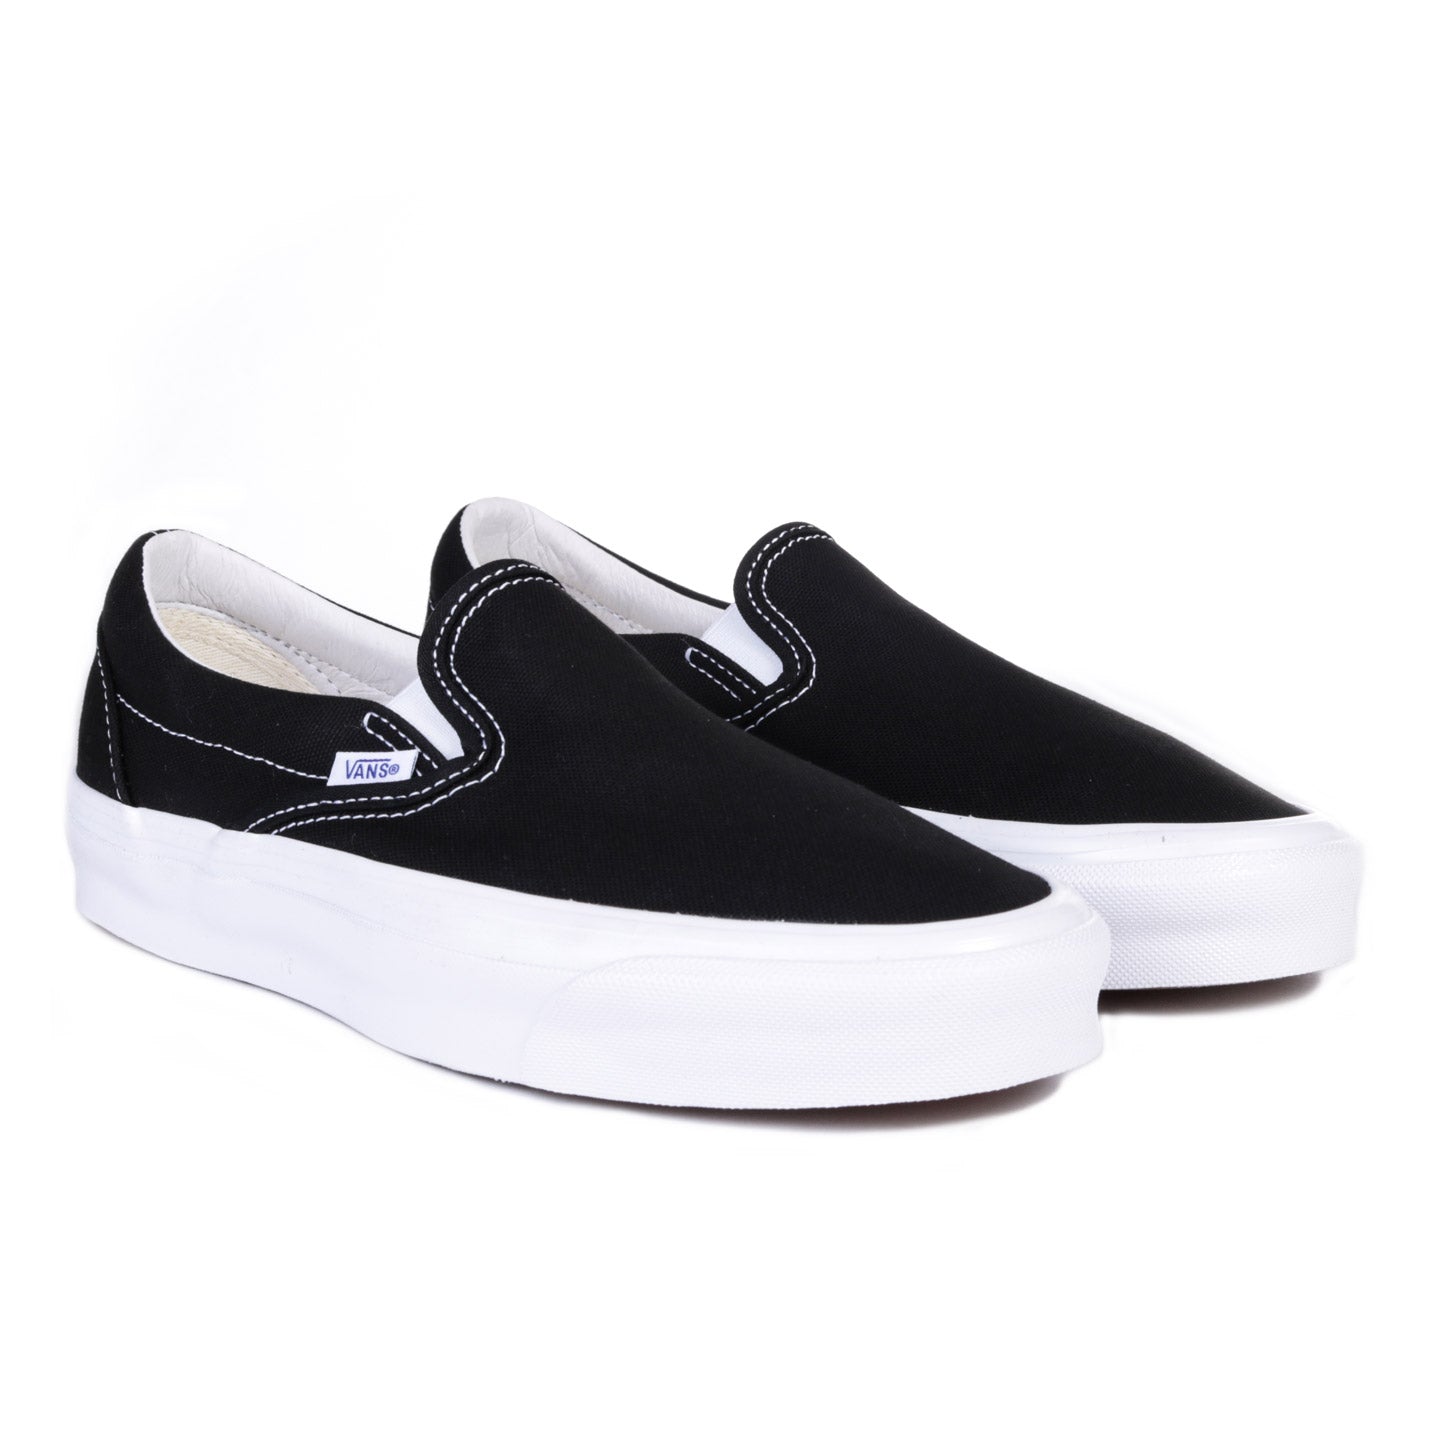 VAULT BY VANS OG CLASSIC SLIP-ON LX CANVAS BLACK TODAY CLOTHING